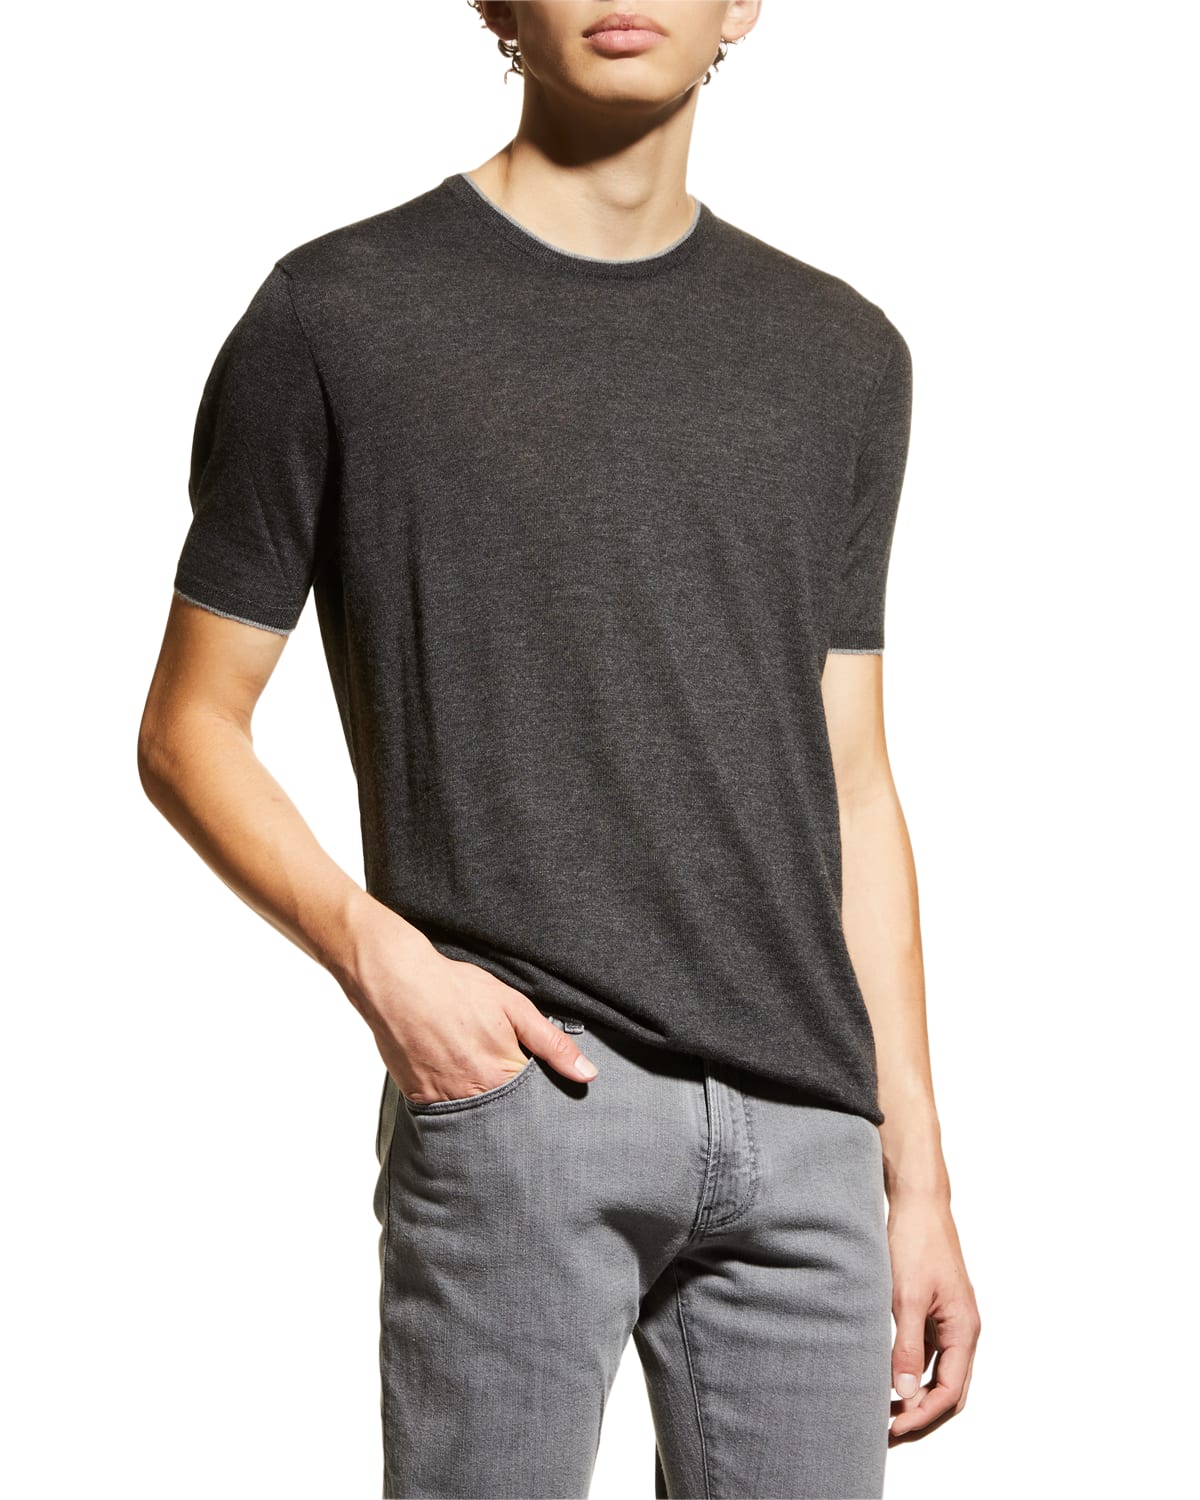 Nomad Men's Cashmere T-shirt W/ Tipping In Charcoal/grey